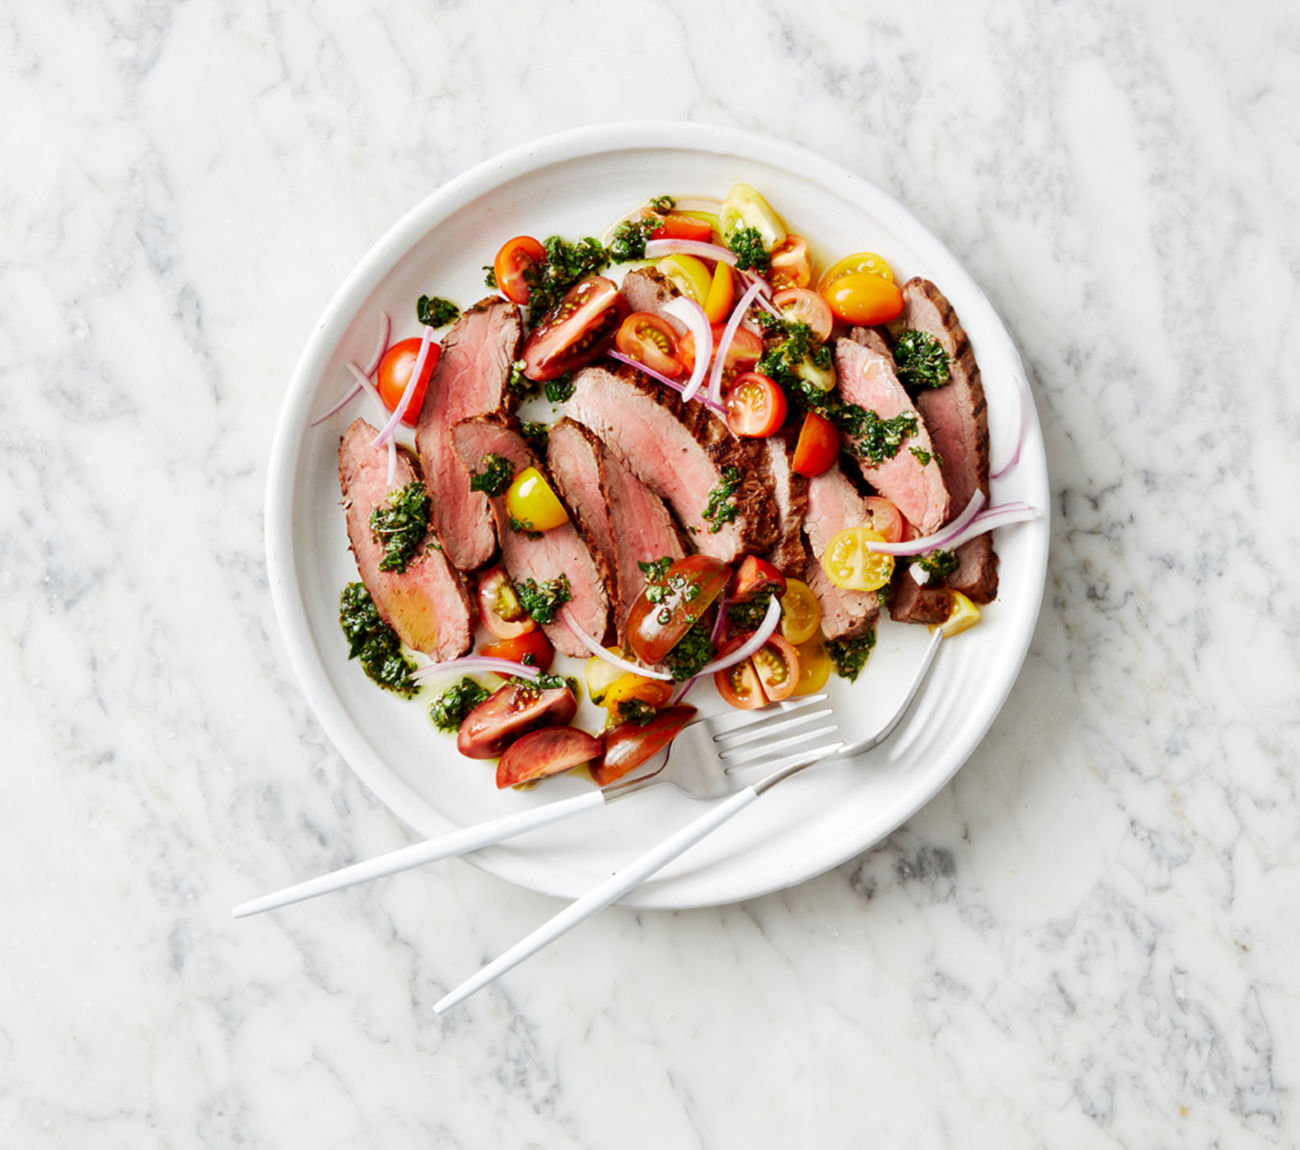 Grilled Flank Steak with Tomato Salad